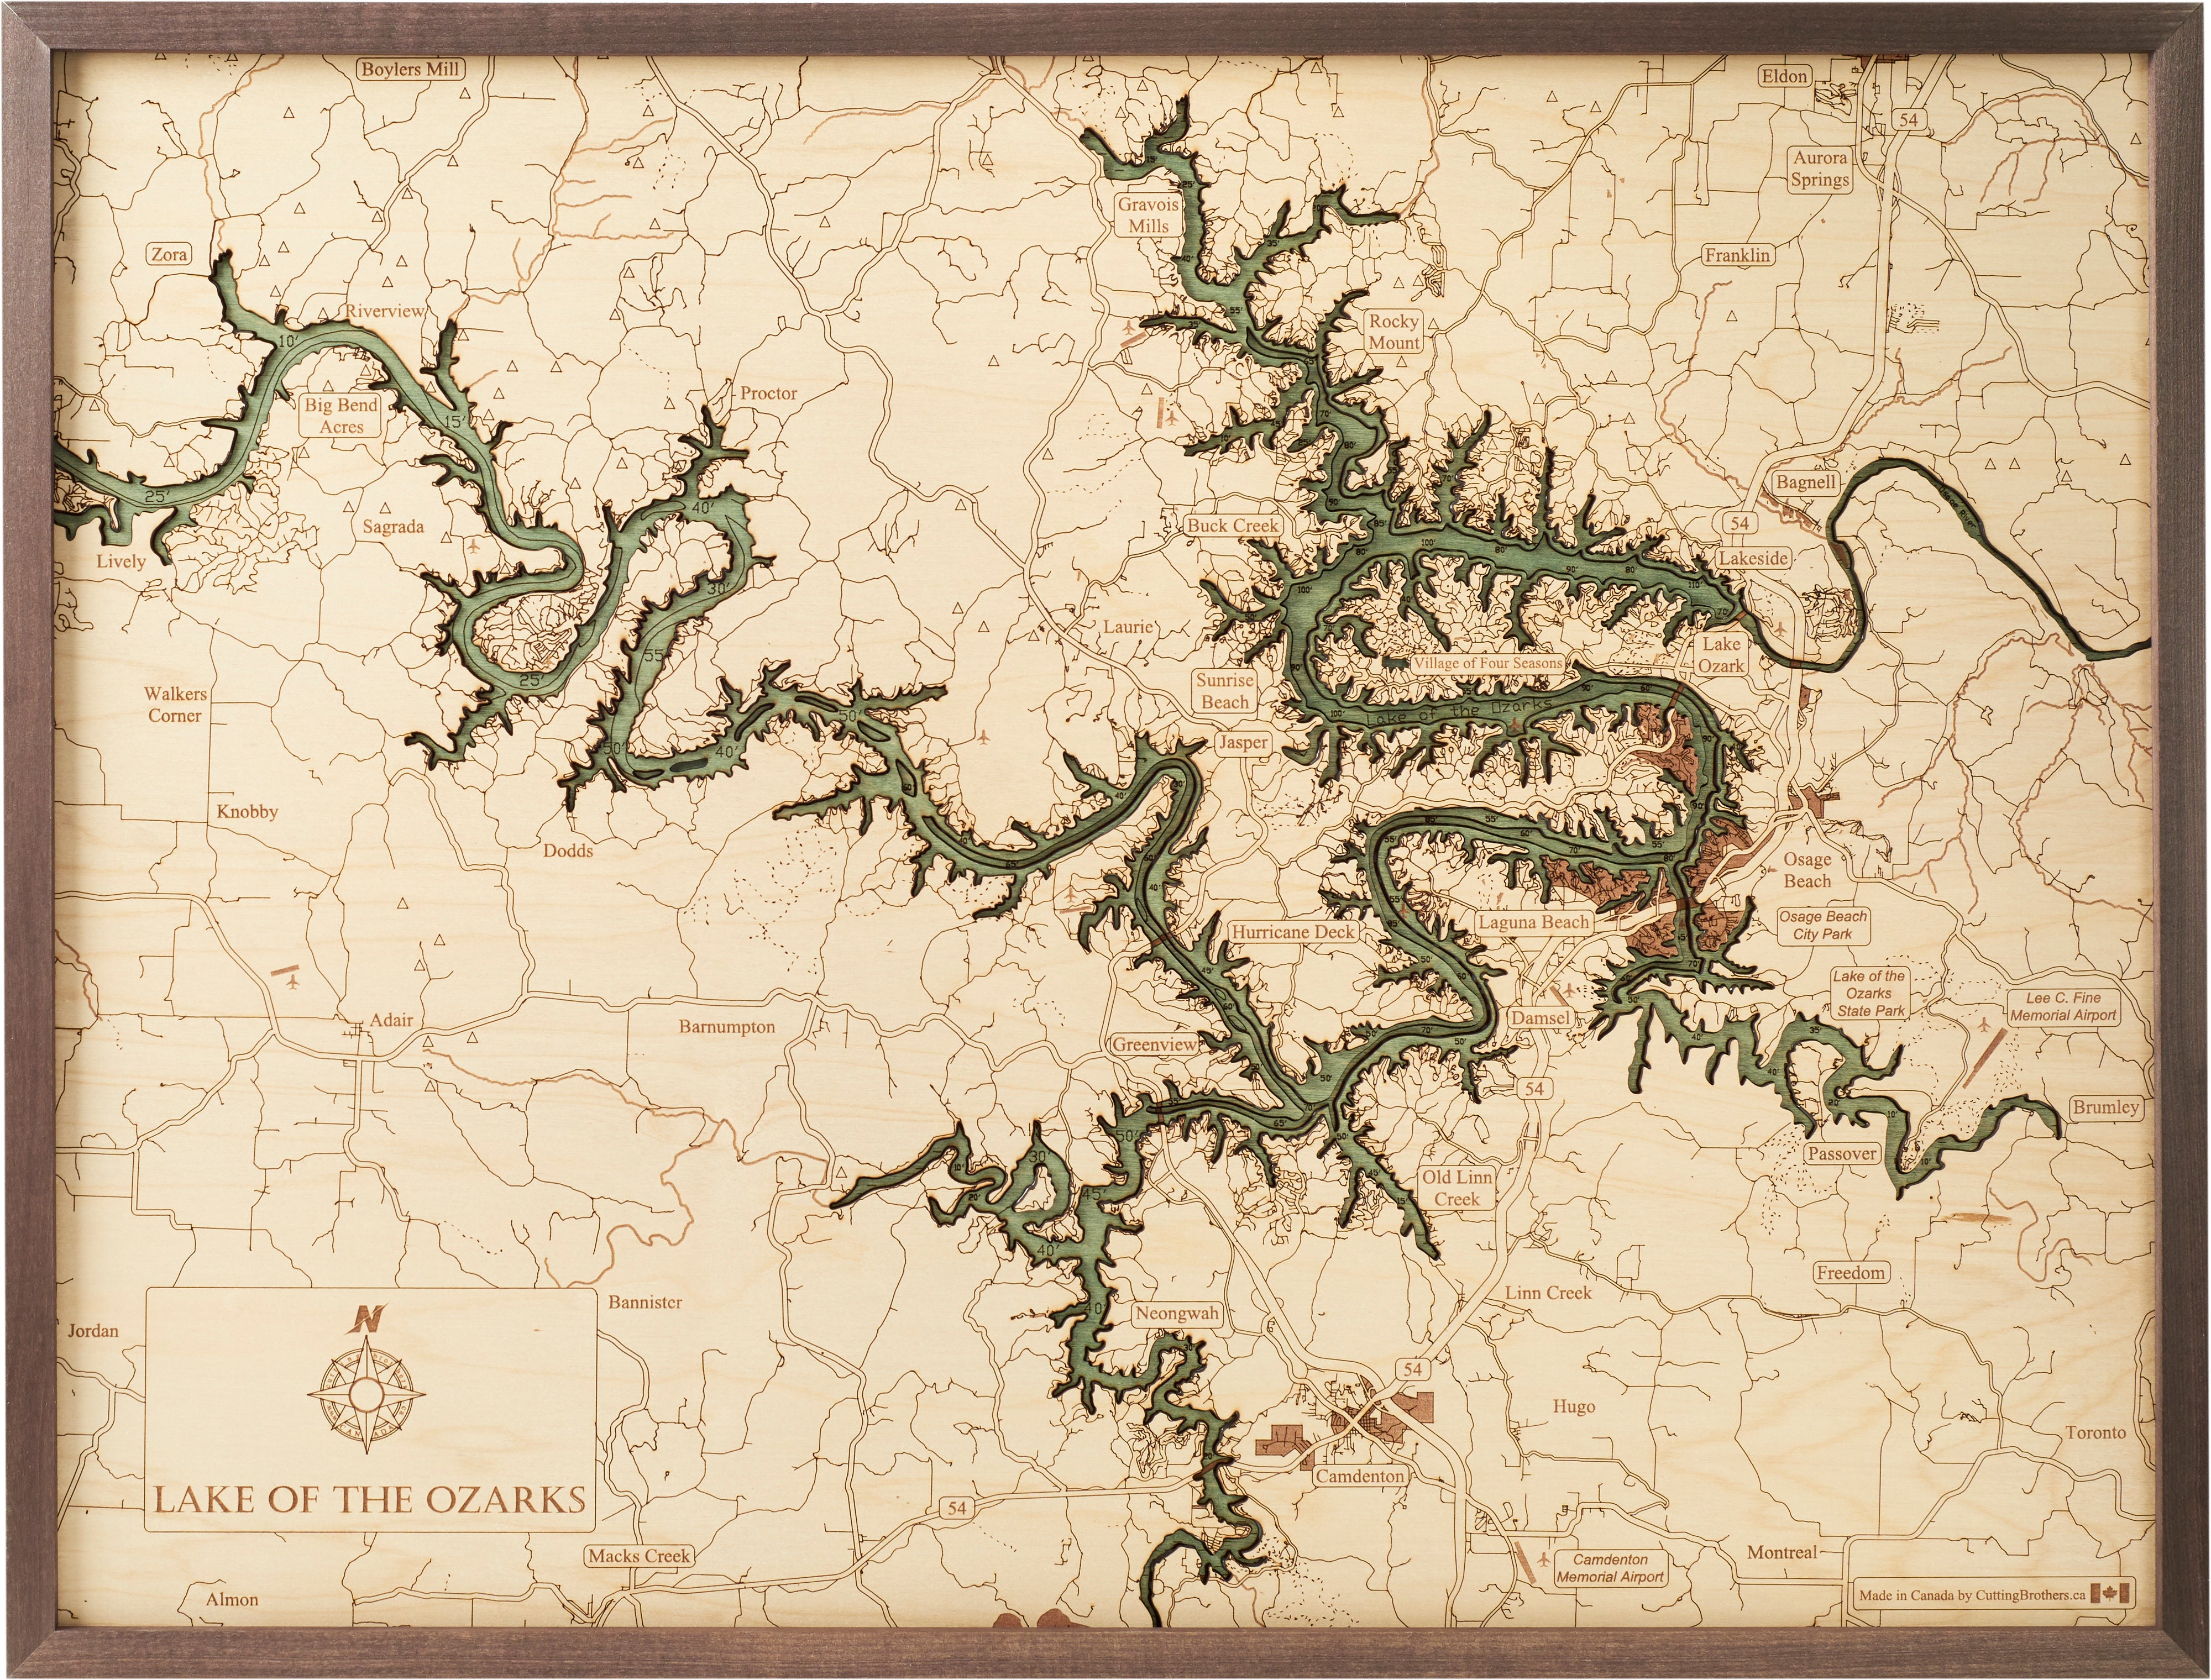 LAKE OF THE OZARKS 3D WOODEN WALL MAP - Version L